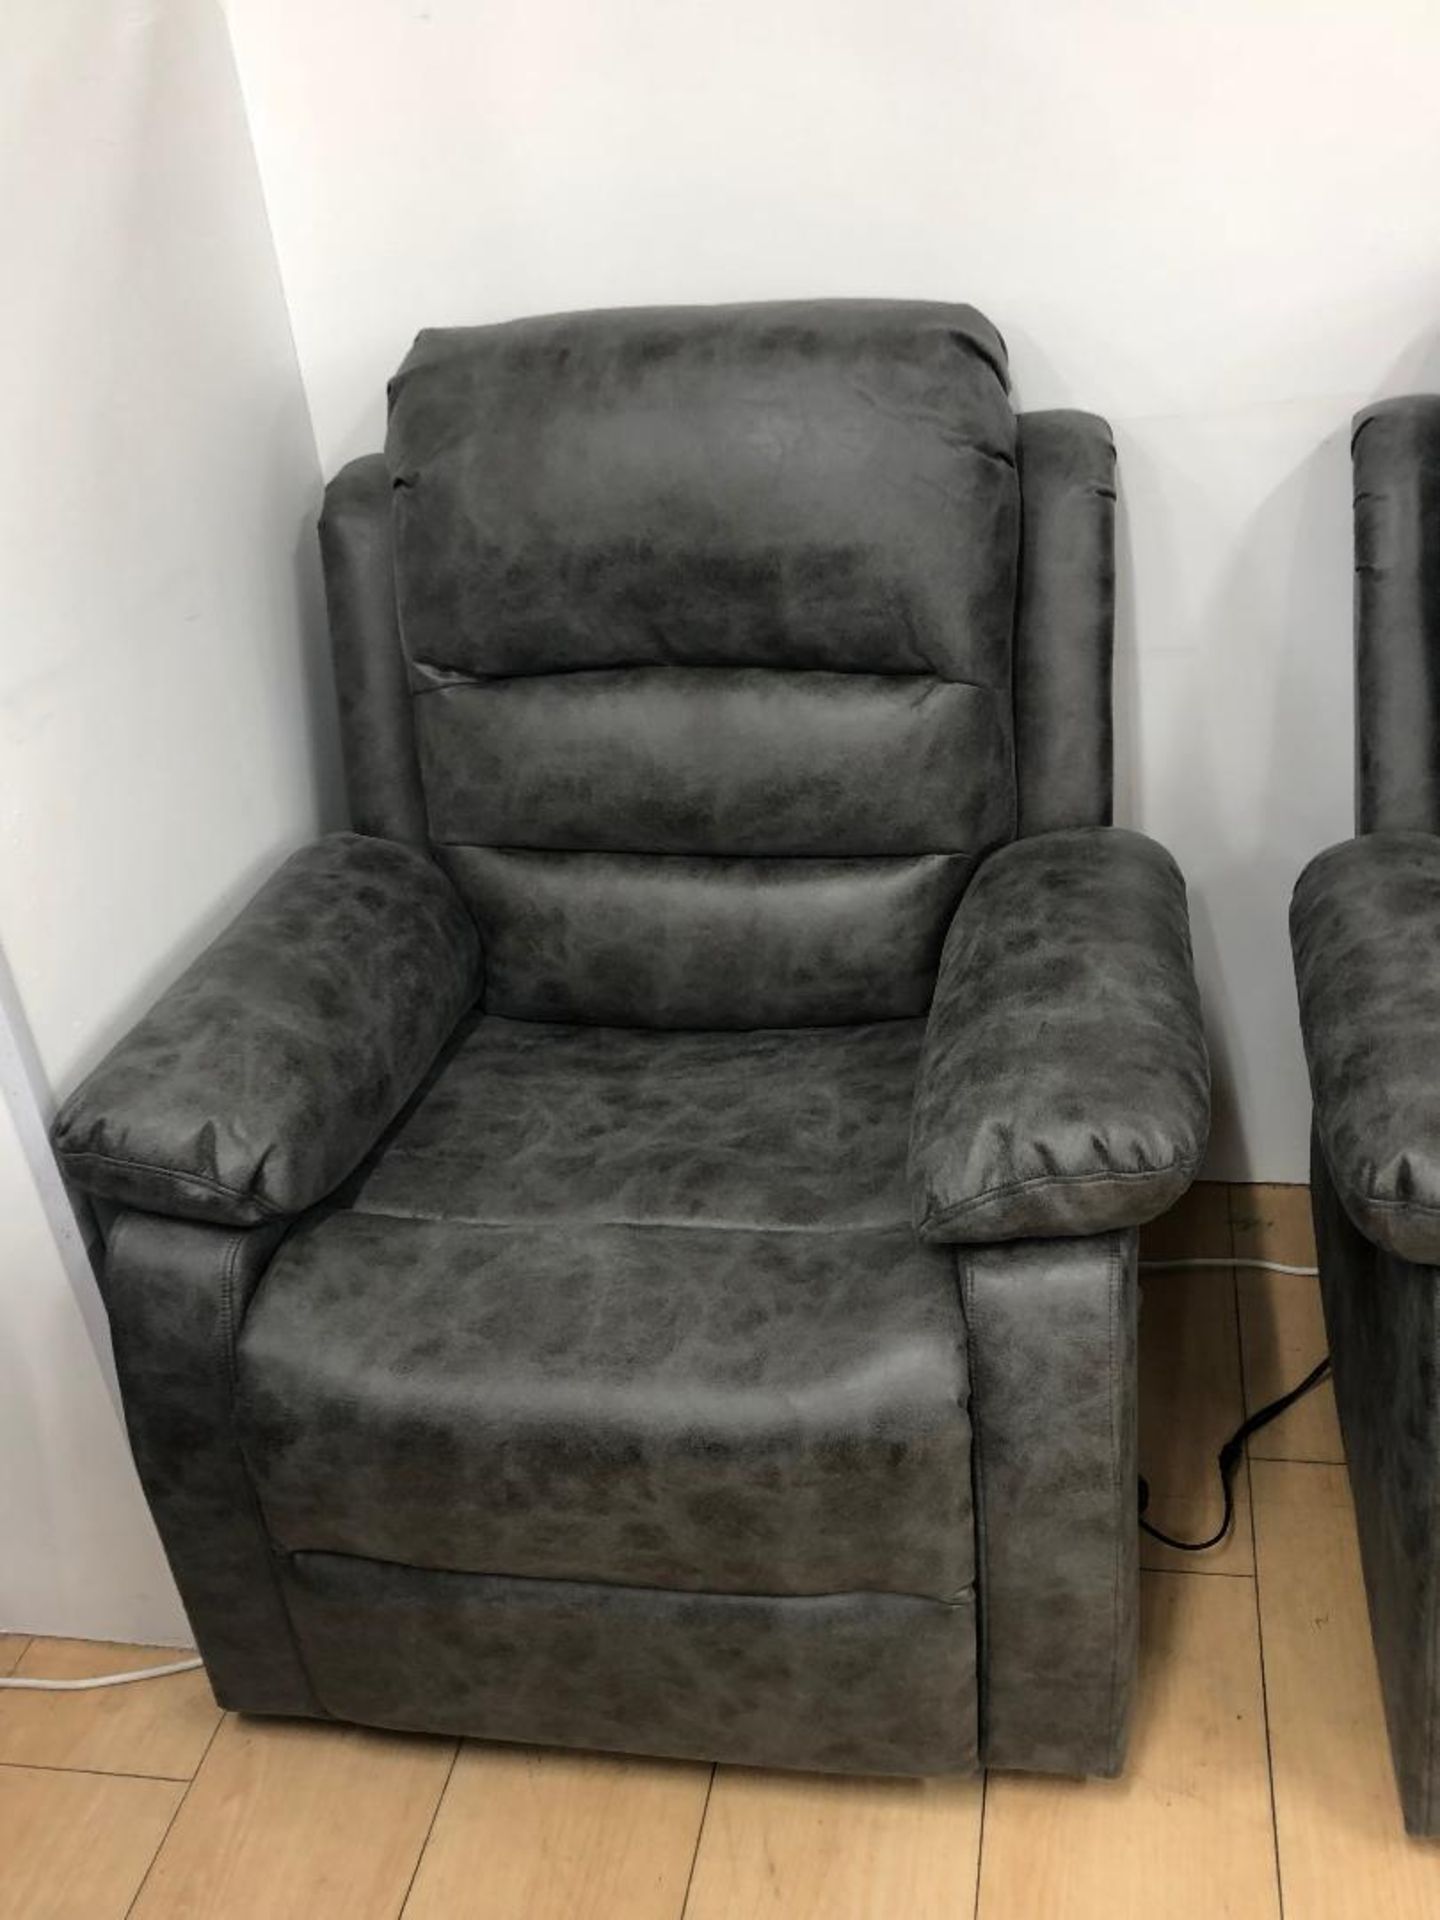 Brand new boxed Cartier 3 seater plus 2 seater plus arm chair in grey plush velvet suede fabric - Image 4 of 4